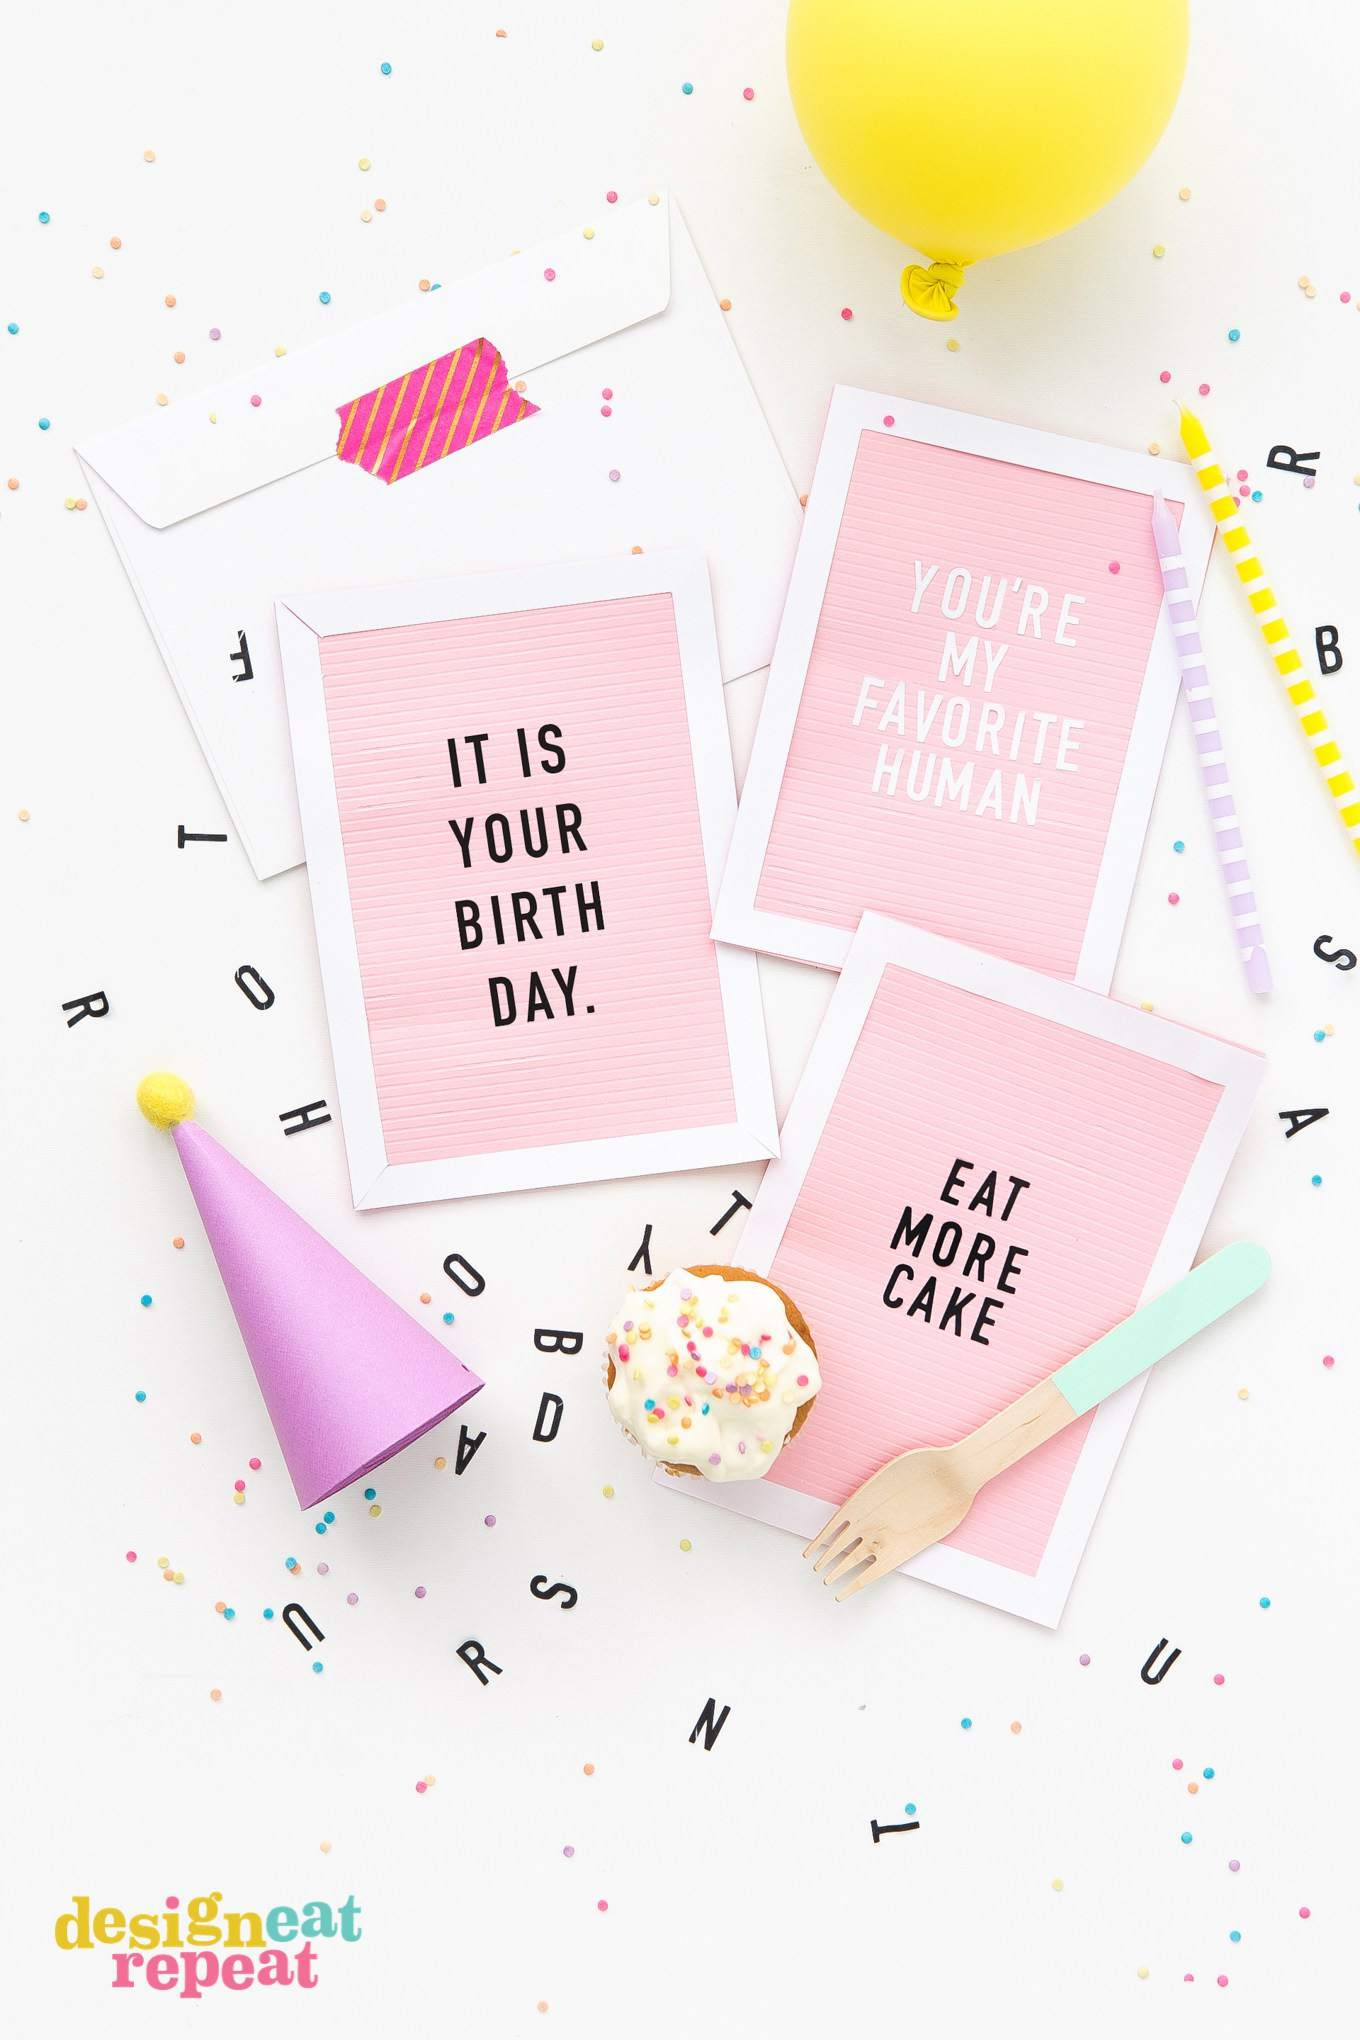 free-printable-birthday-cards-for-your-best-friend